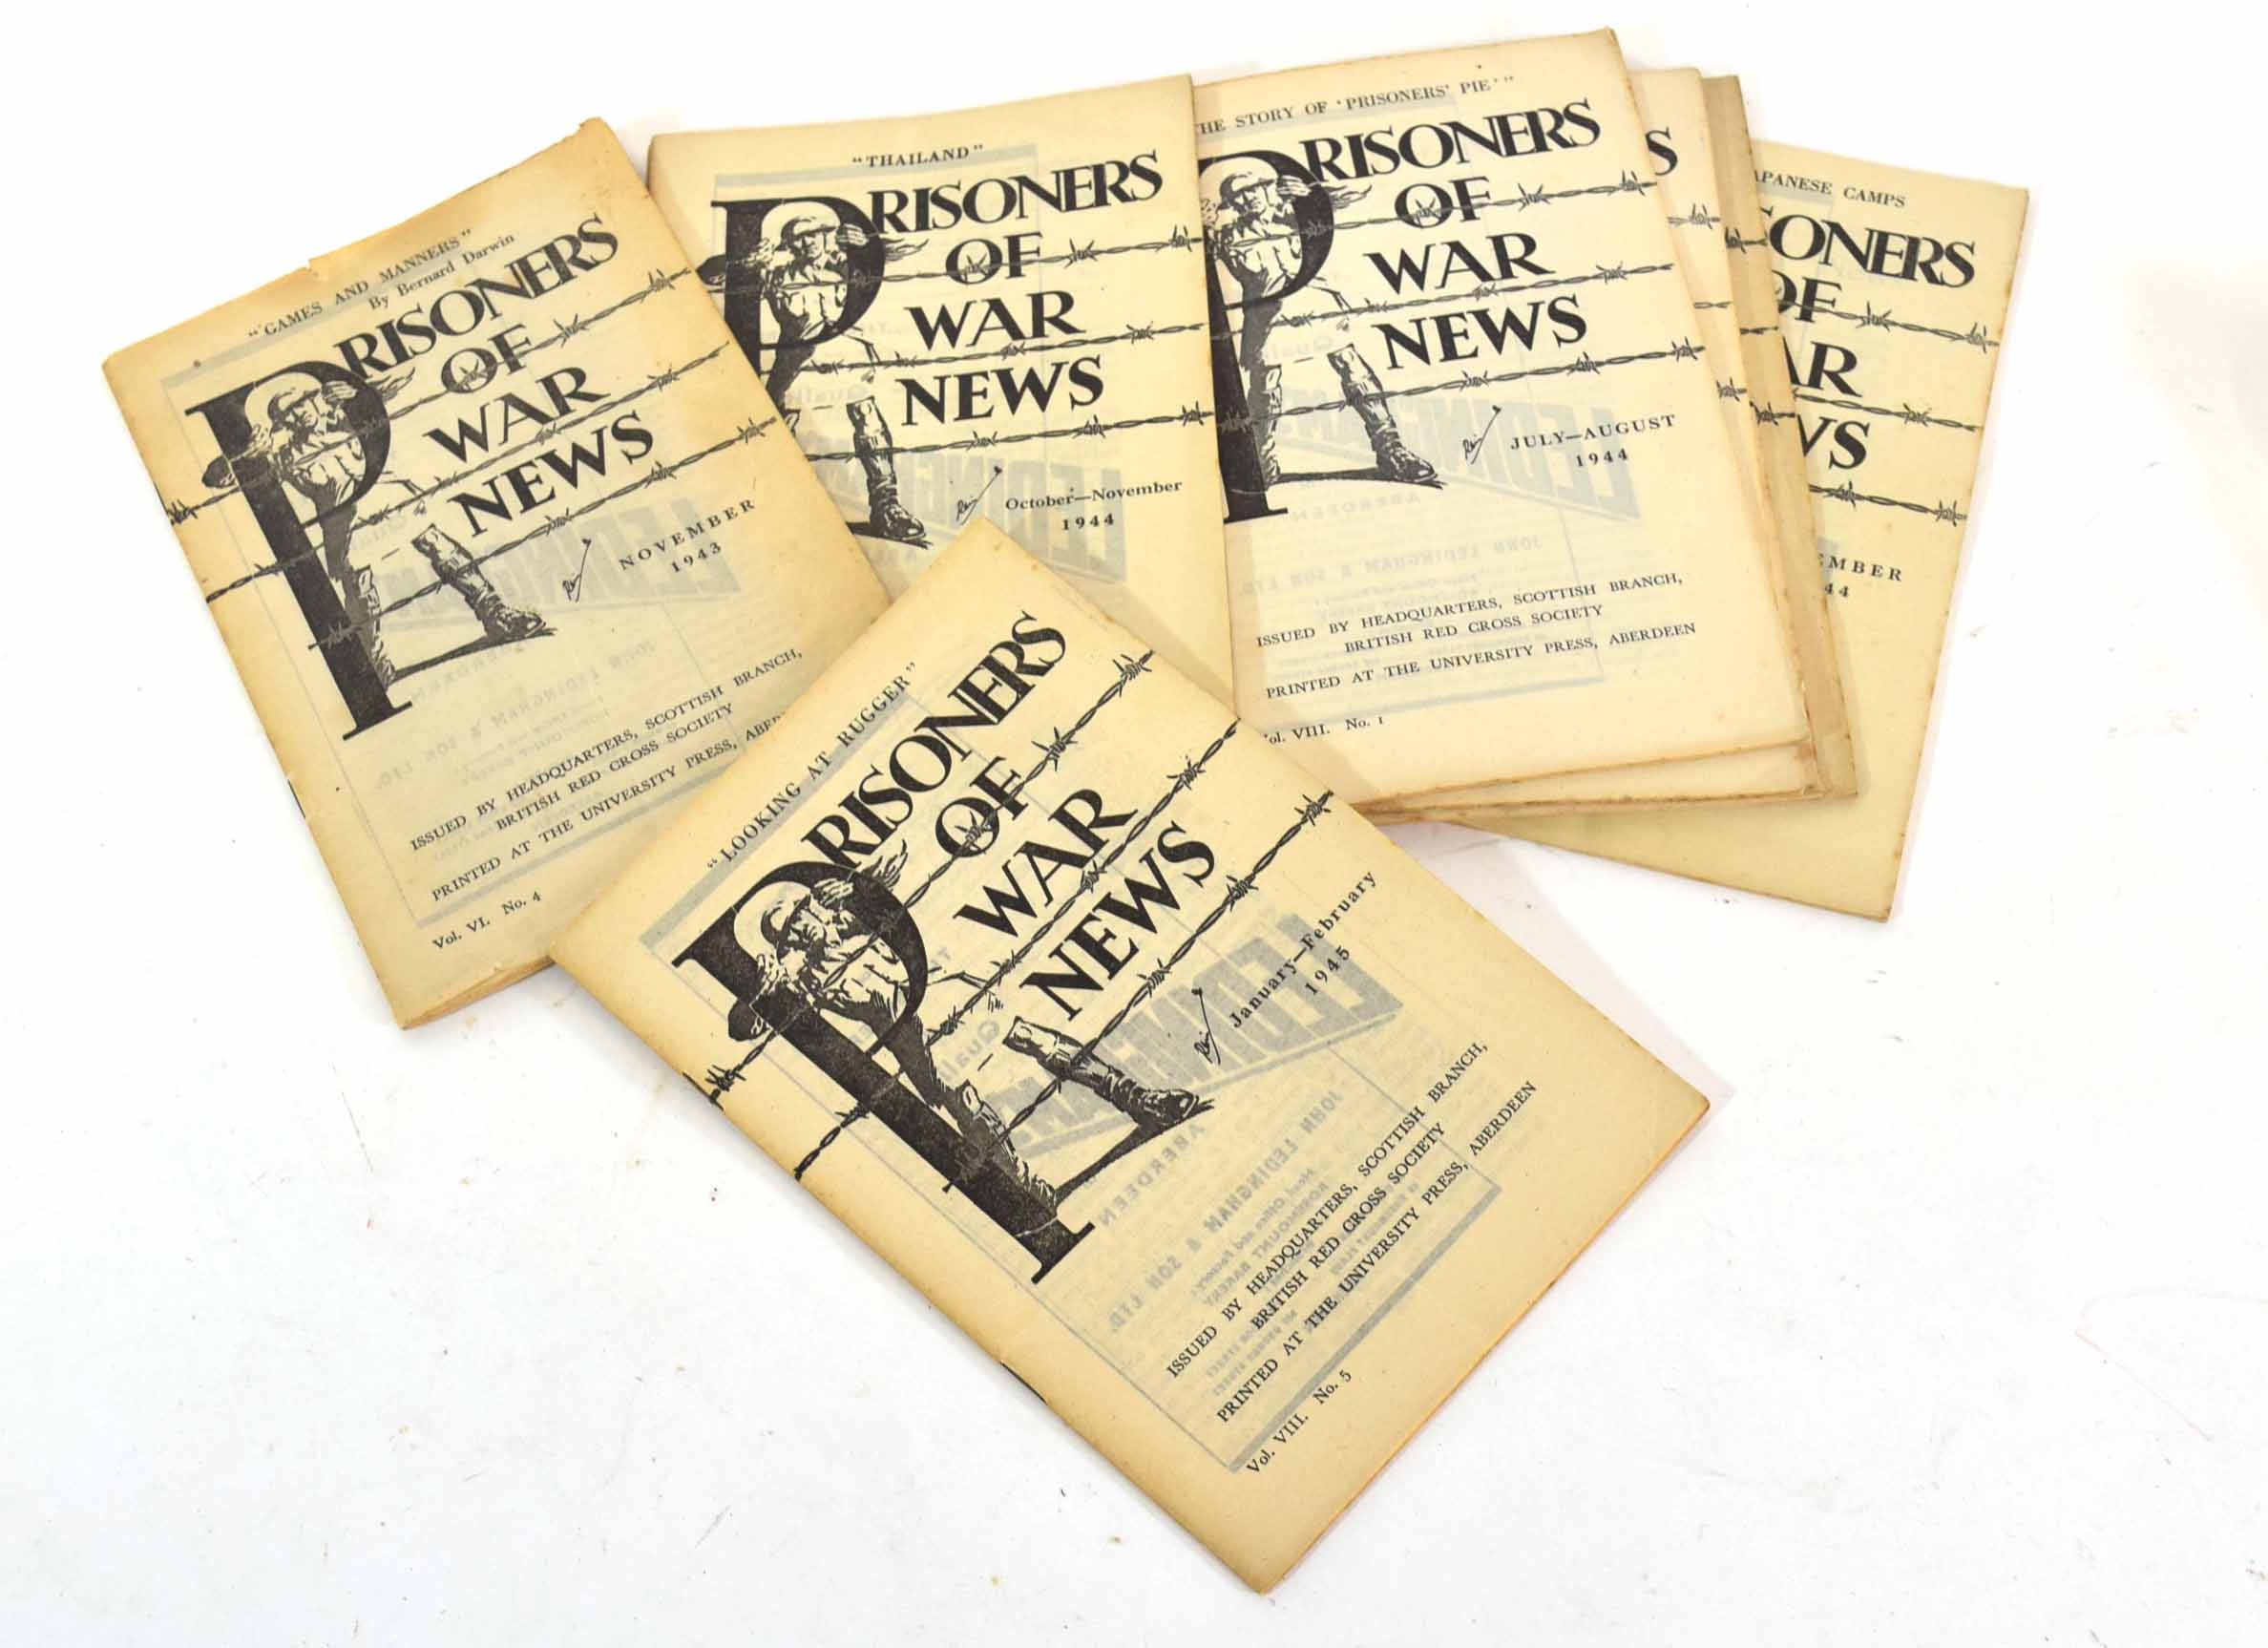 Quantity of nine prisoners of war news magazines vols 6, 7, 8, varying dates from Nov 1943 to Jan